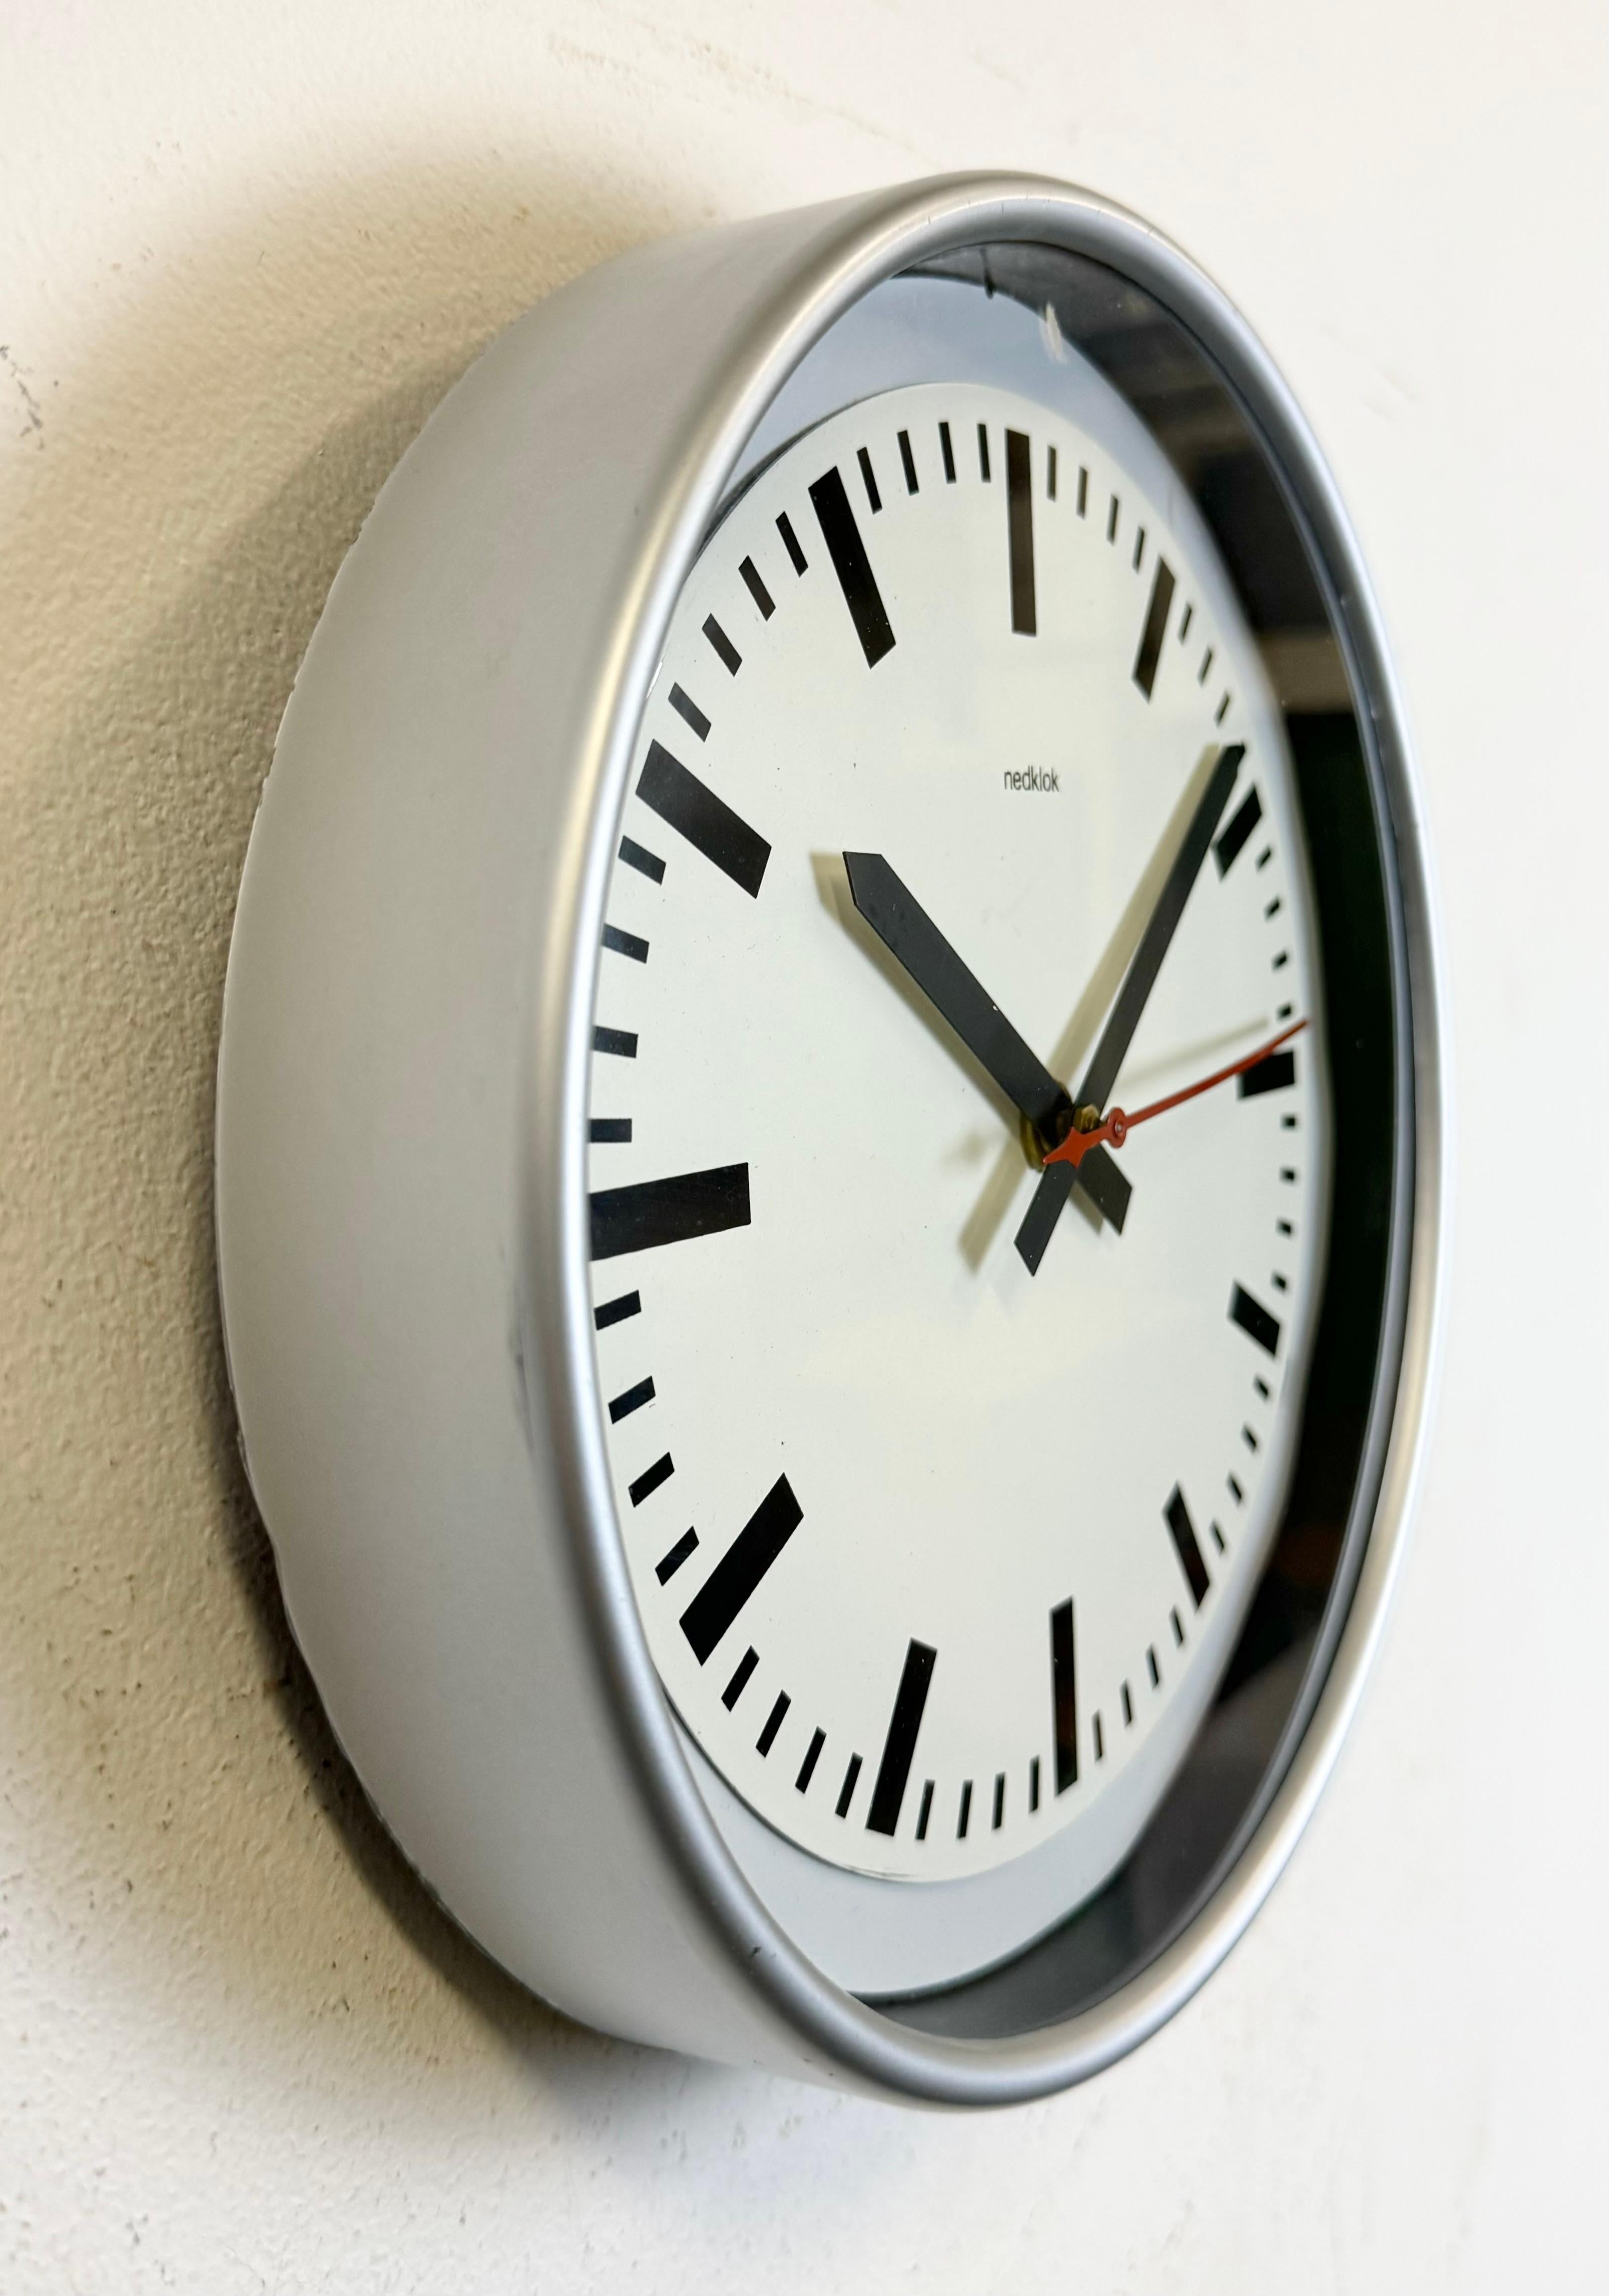 Vintage Grey Electric Station Wall Clock from Nedklok, 1990s In Good Condition For Sale In Kojetice, CZ